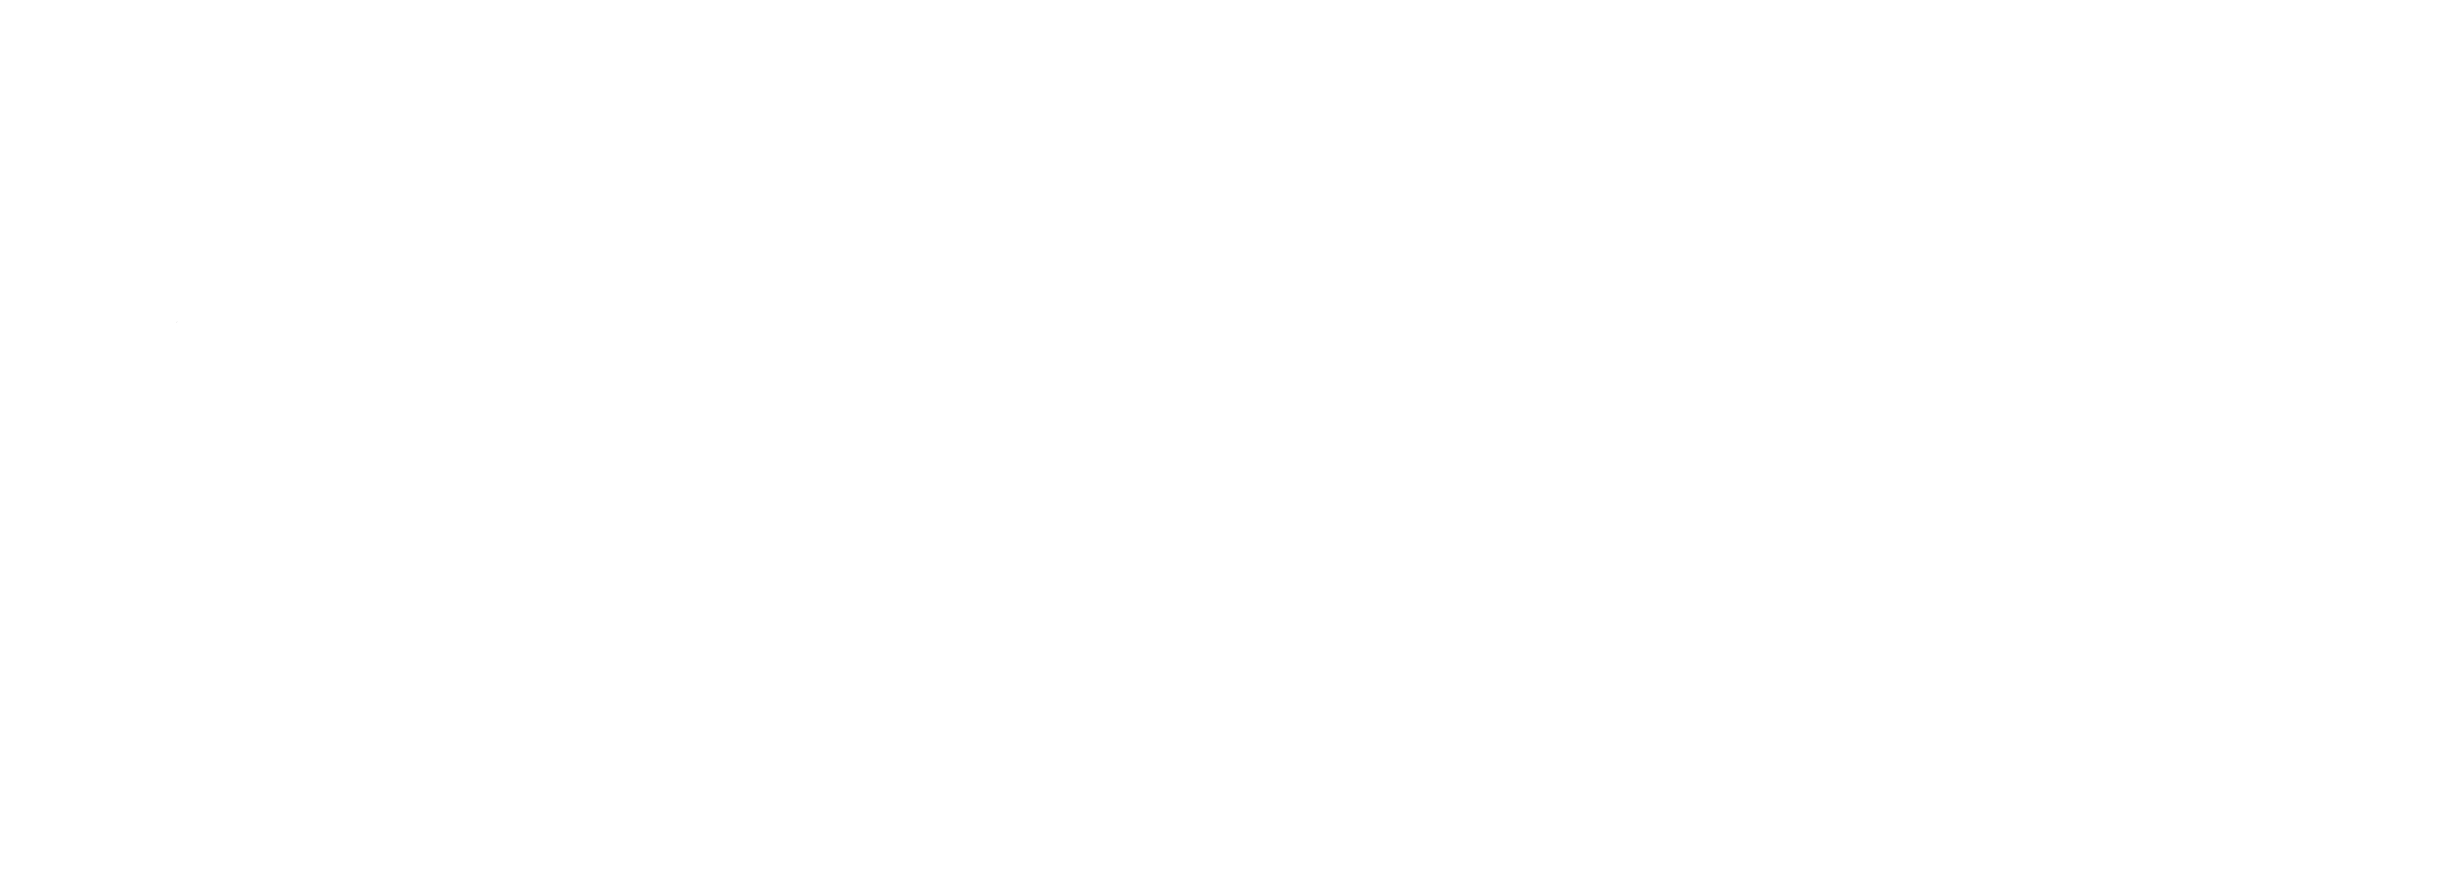 Vera Therapeutics logo large for dark backgrounds (transparent PNG)